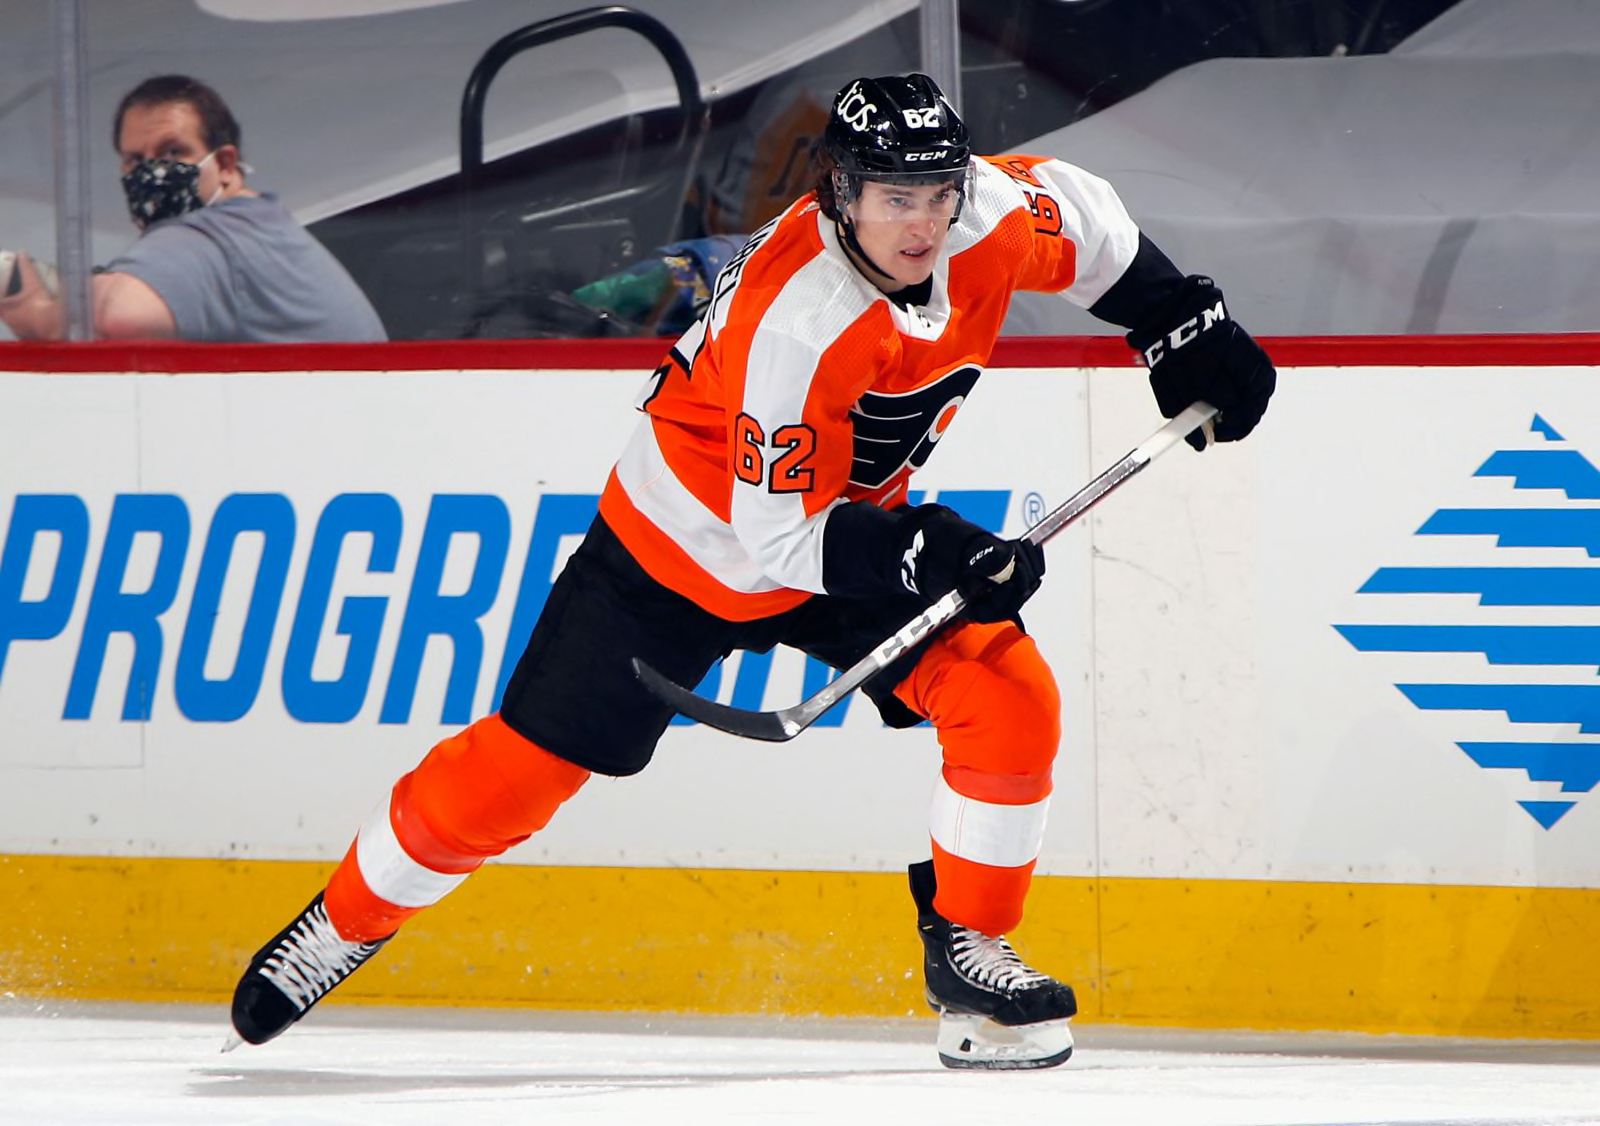 Flyers Nation on X: Nicolas Aube-Kubel falls while carrying the